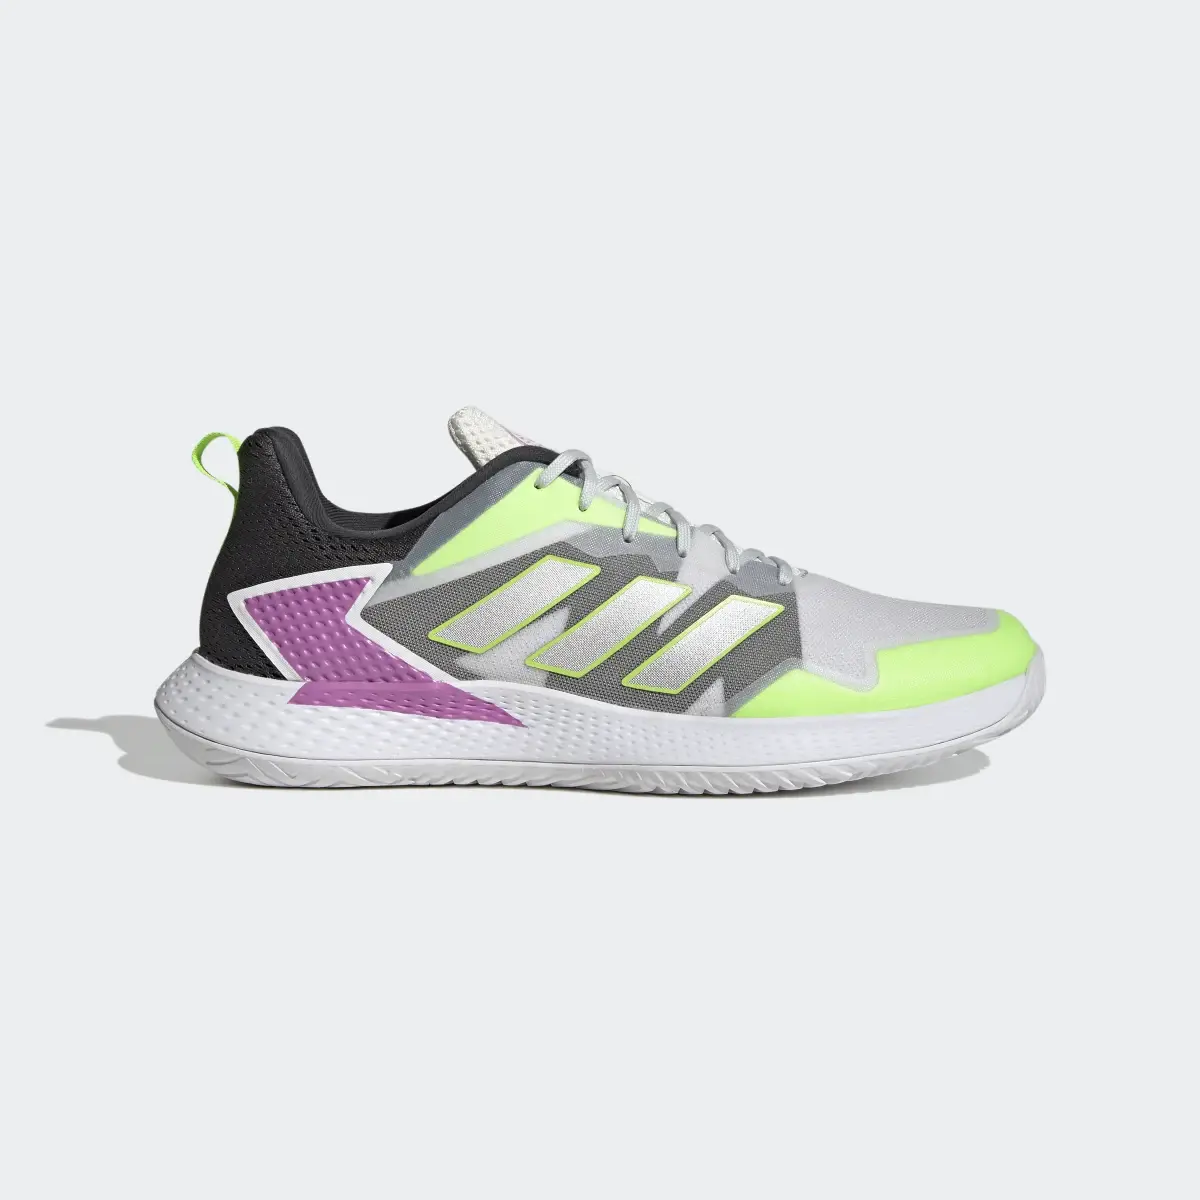 Adidas Defiant Speed Tennis Shoes. 2